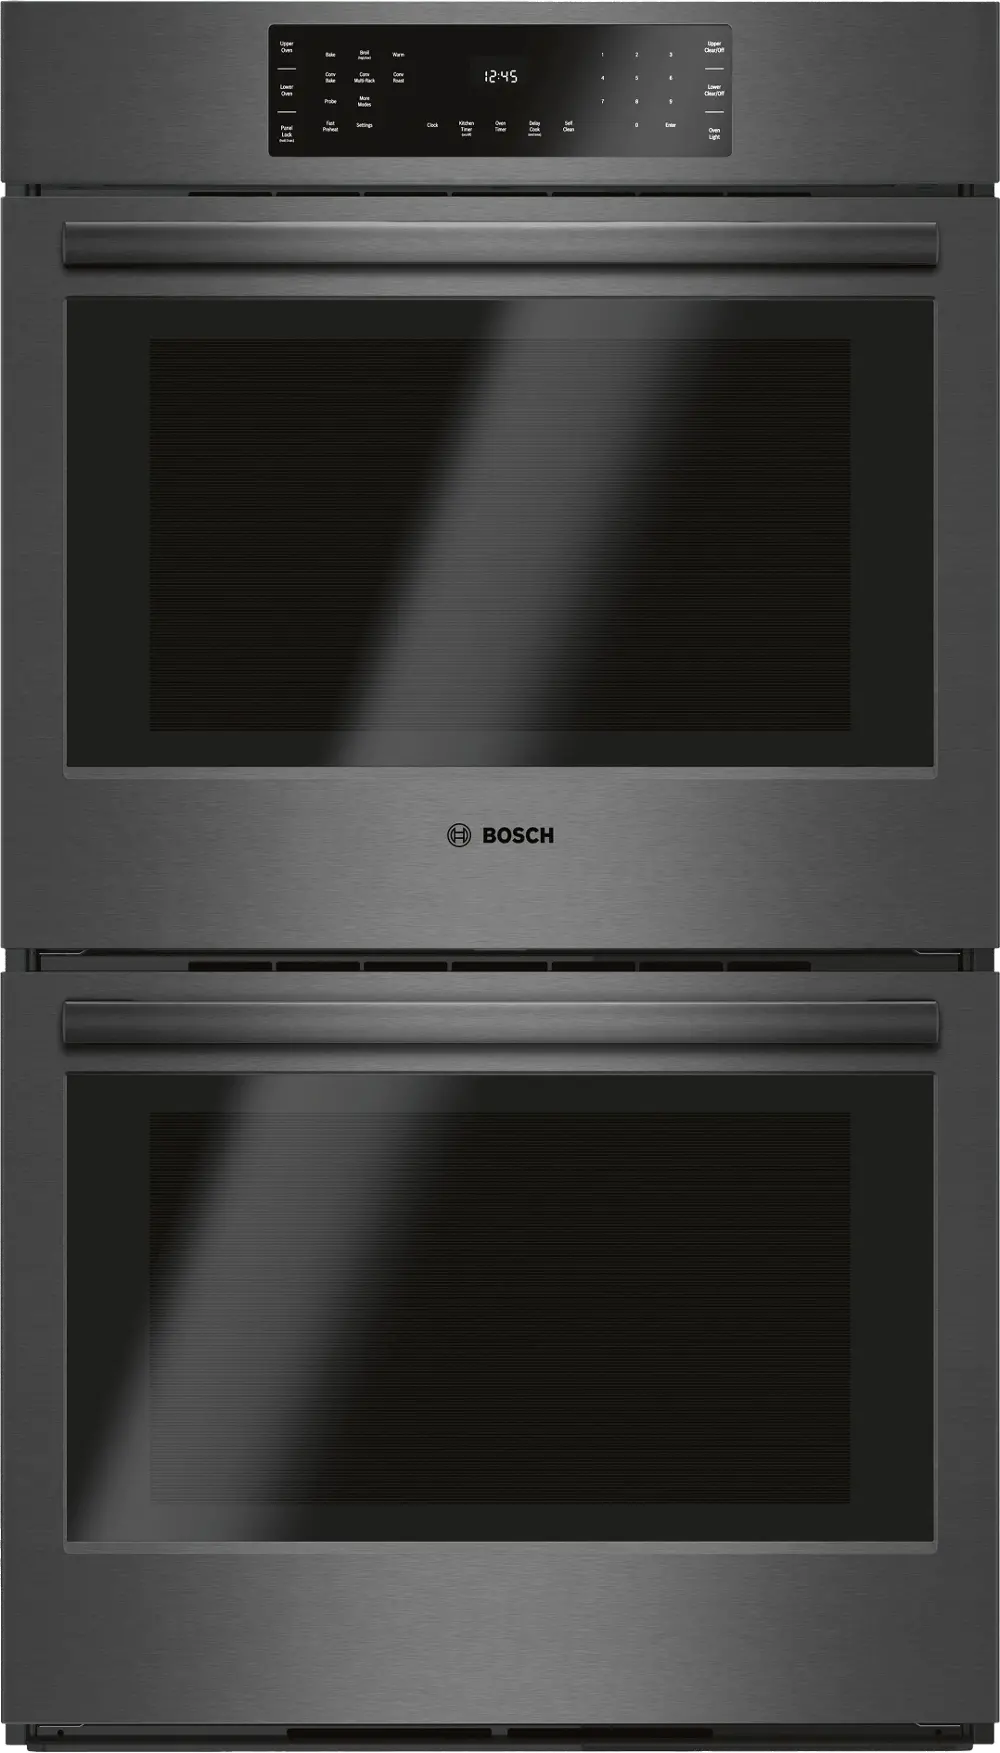 HBL8642UC Bosch 30 Inch Double Wall Oven - Black Stainless Steel-1